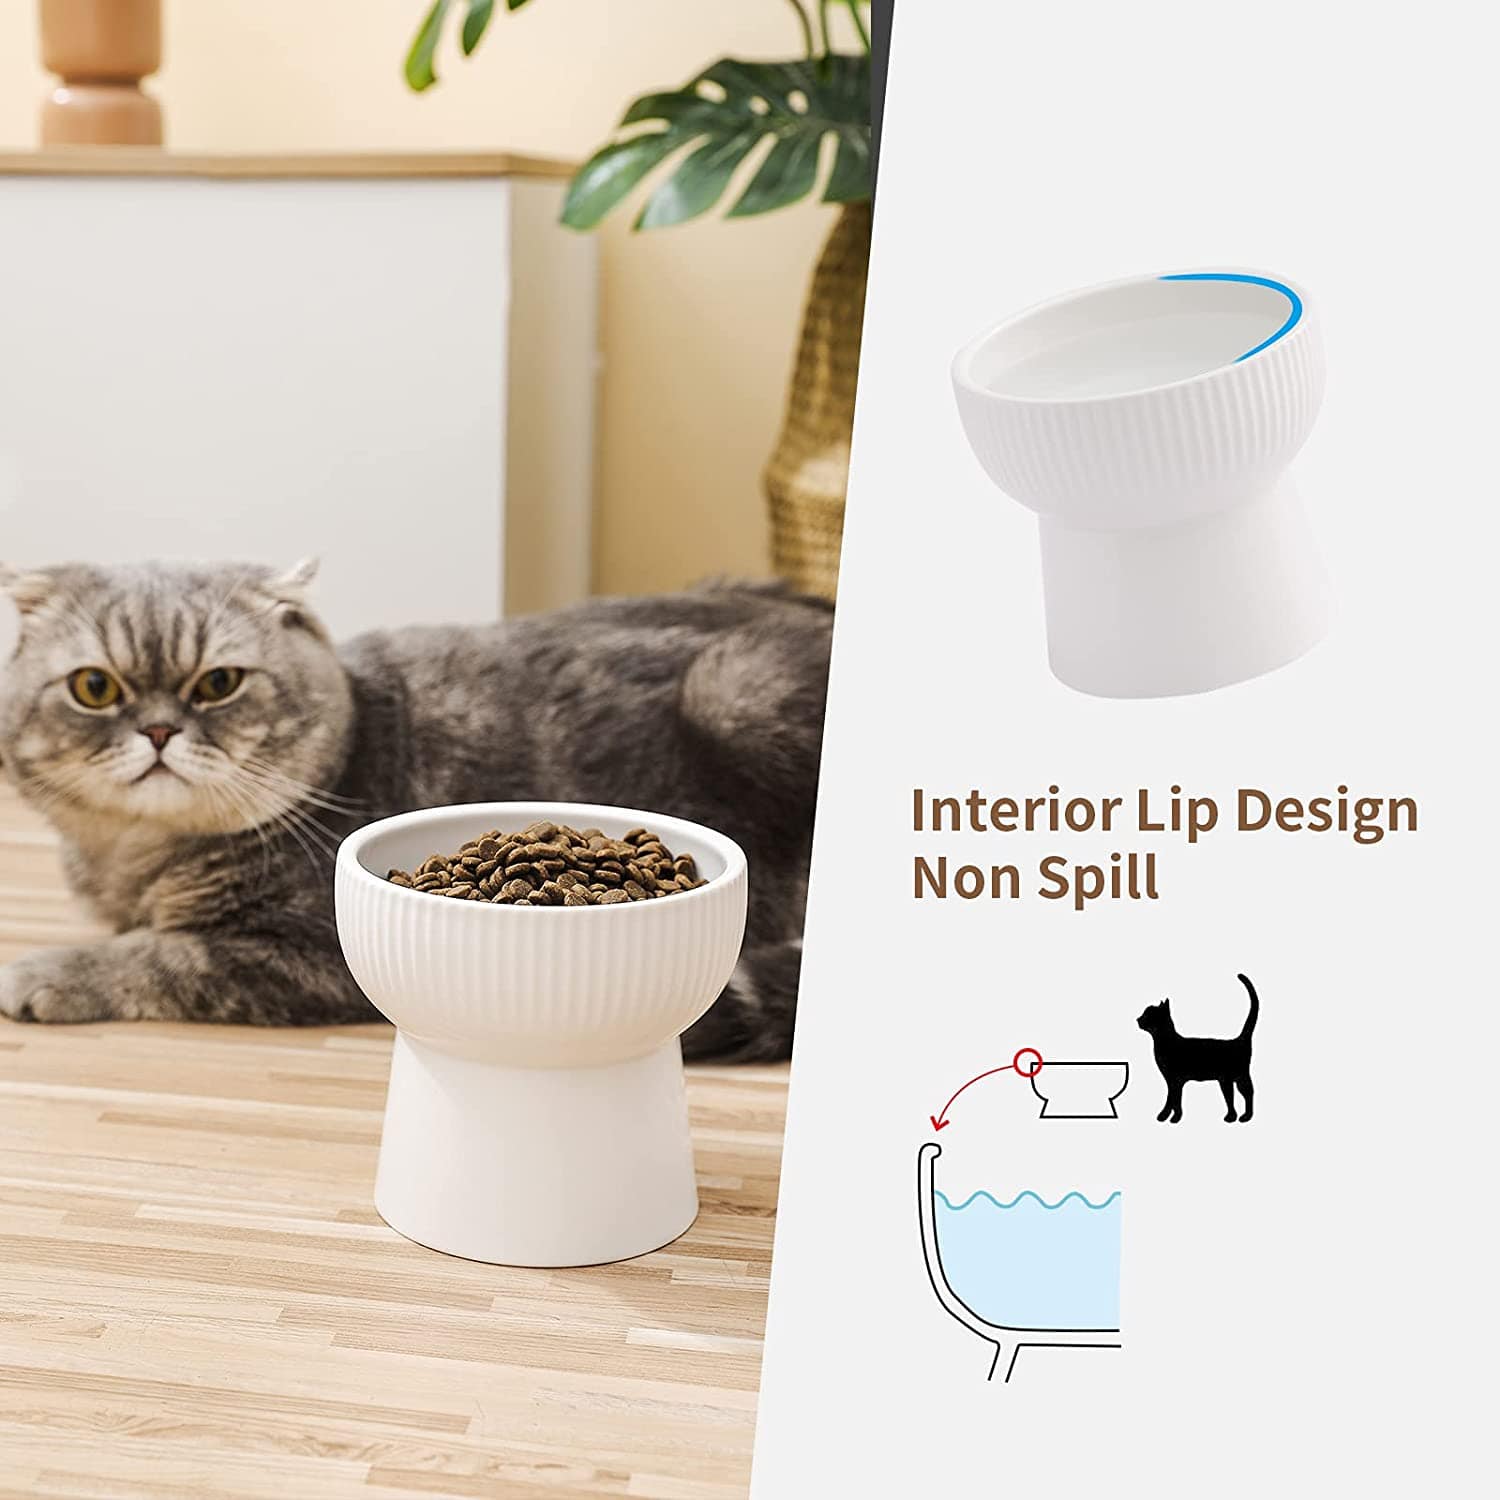 KUTKUT Ceramic Cat Food Or Water Bowl, Raised Cat Feeder Dishes with Stand, Elevated Pet Food Bowl for Cats and Small Dogs, Stress Free Backflow Prevention, Anti Vomiting & Reduce Neck Burden